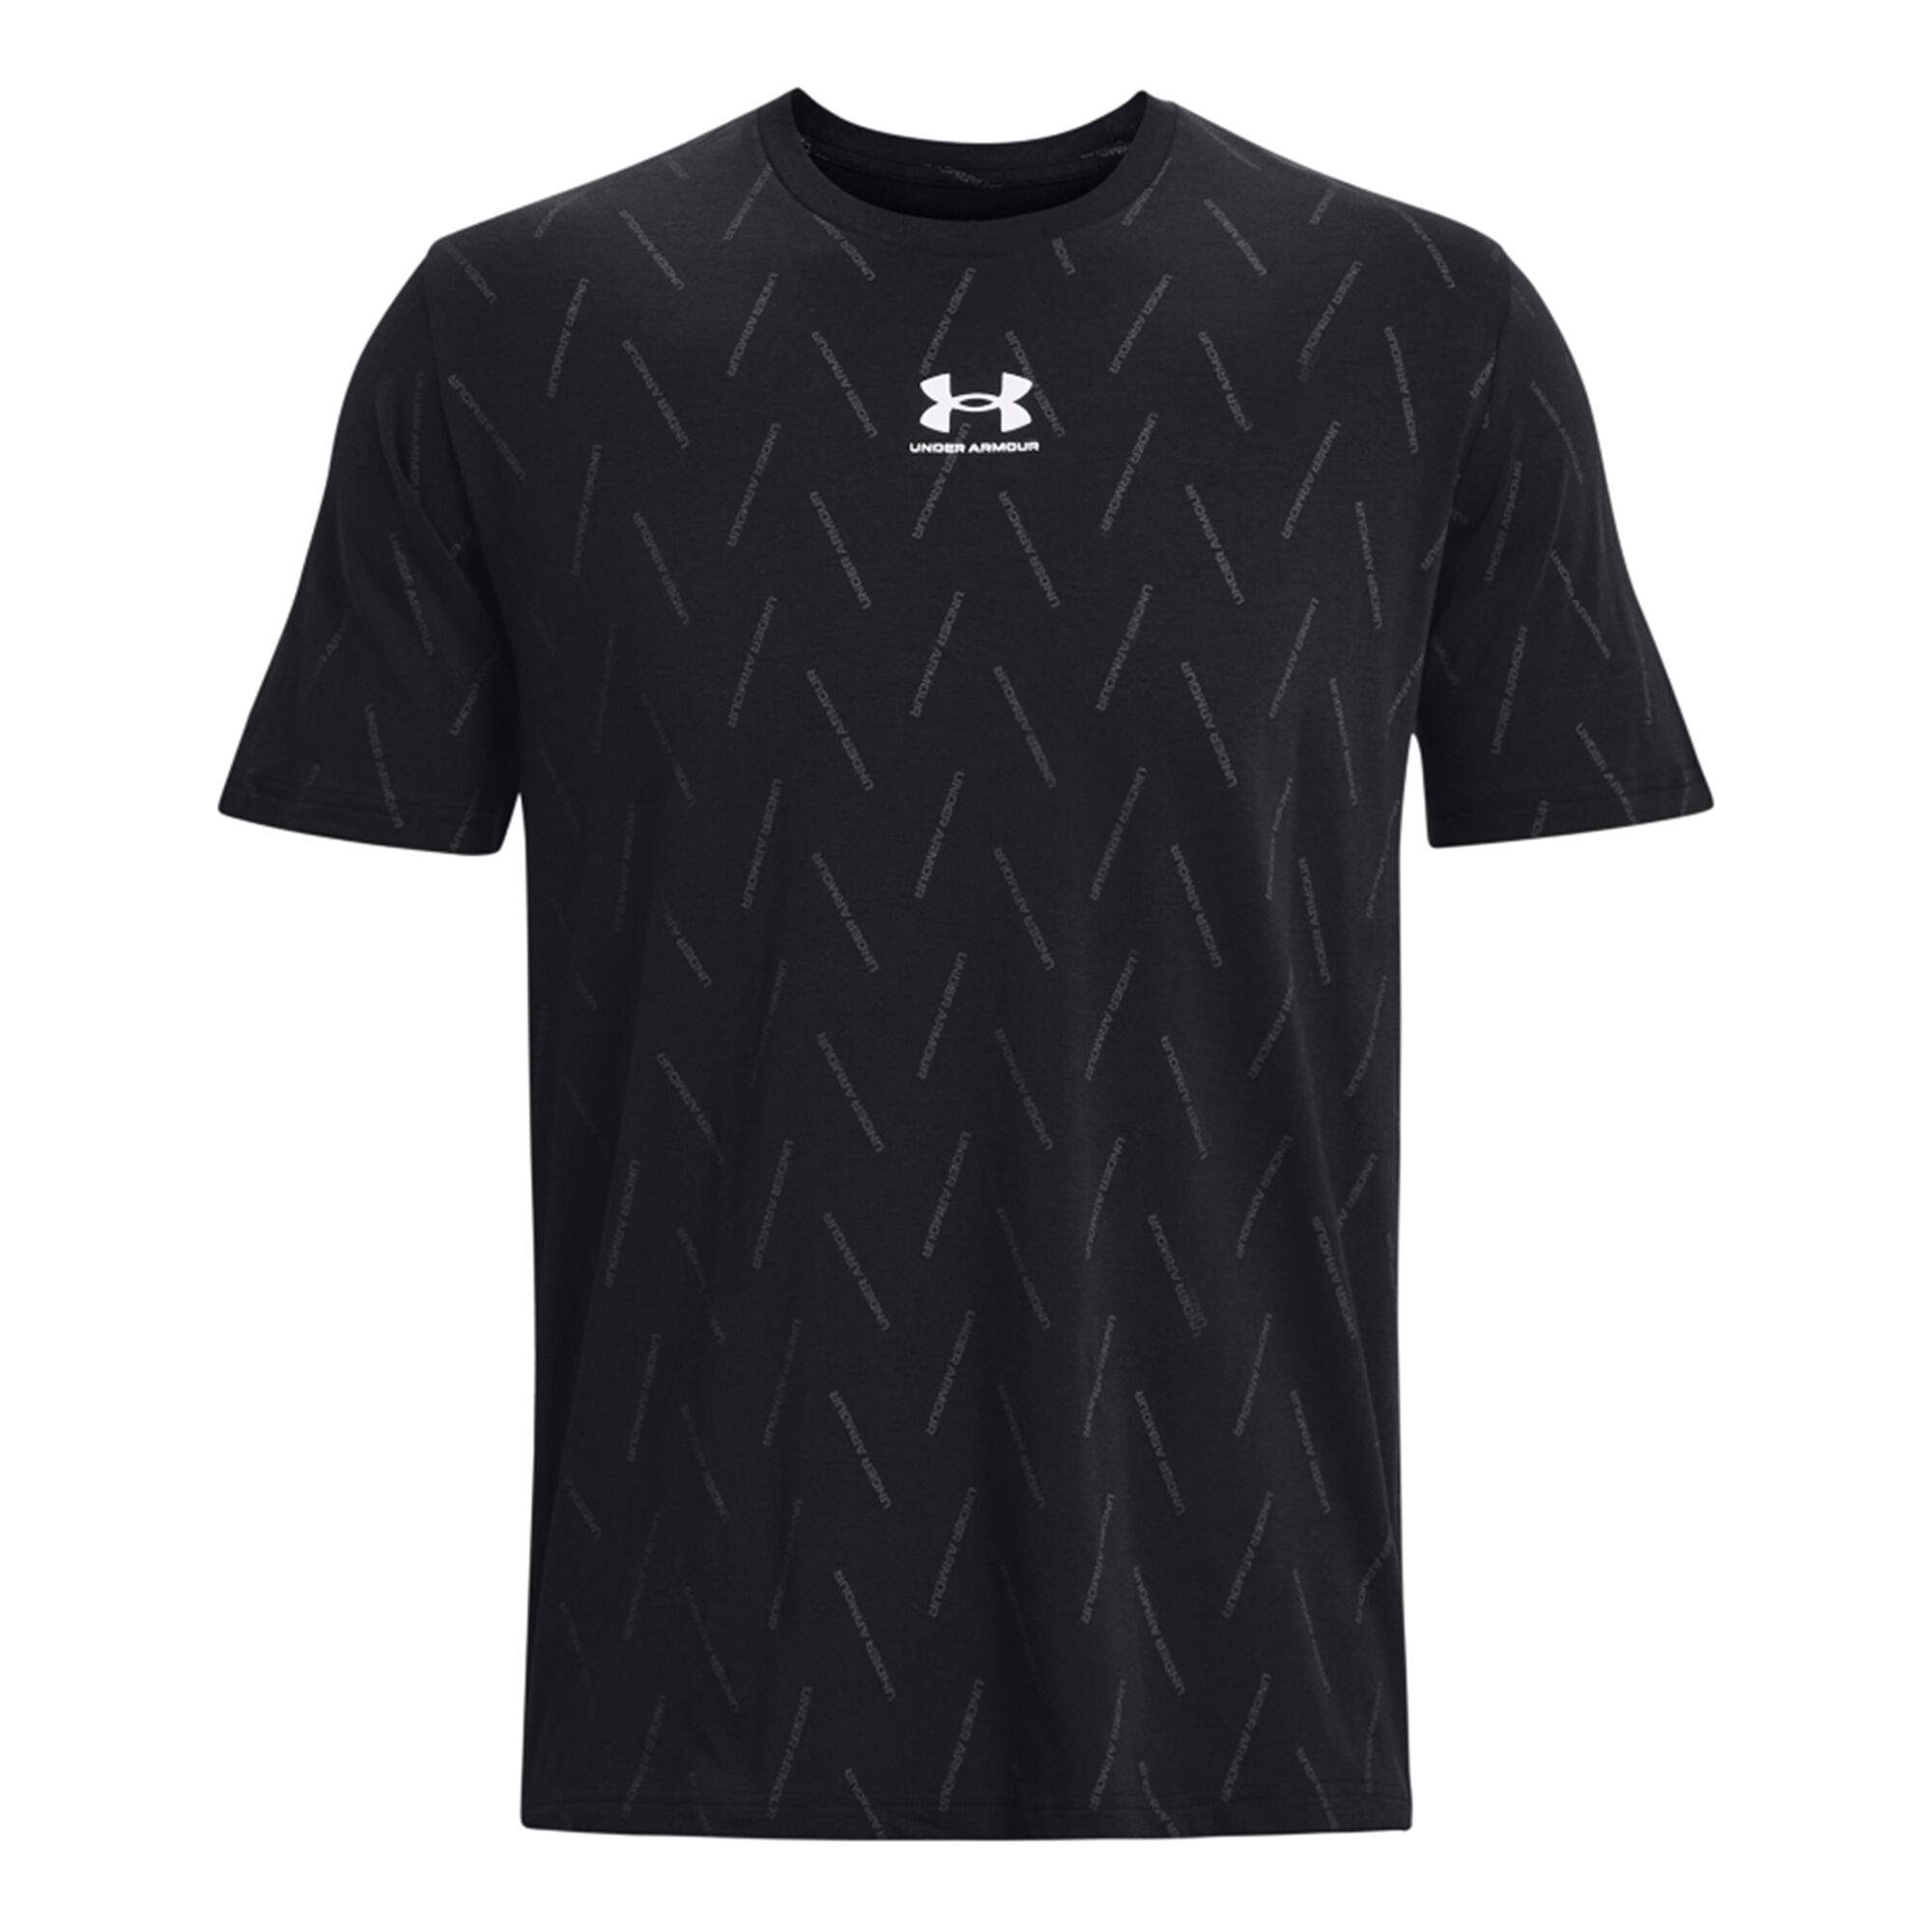 Buy Under Armour Elevated Core All Over Print New T-Shirt Men Black online